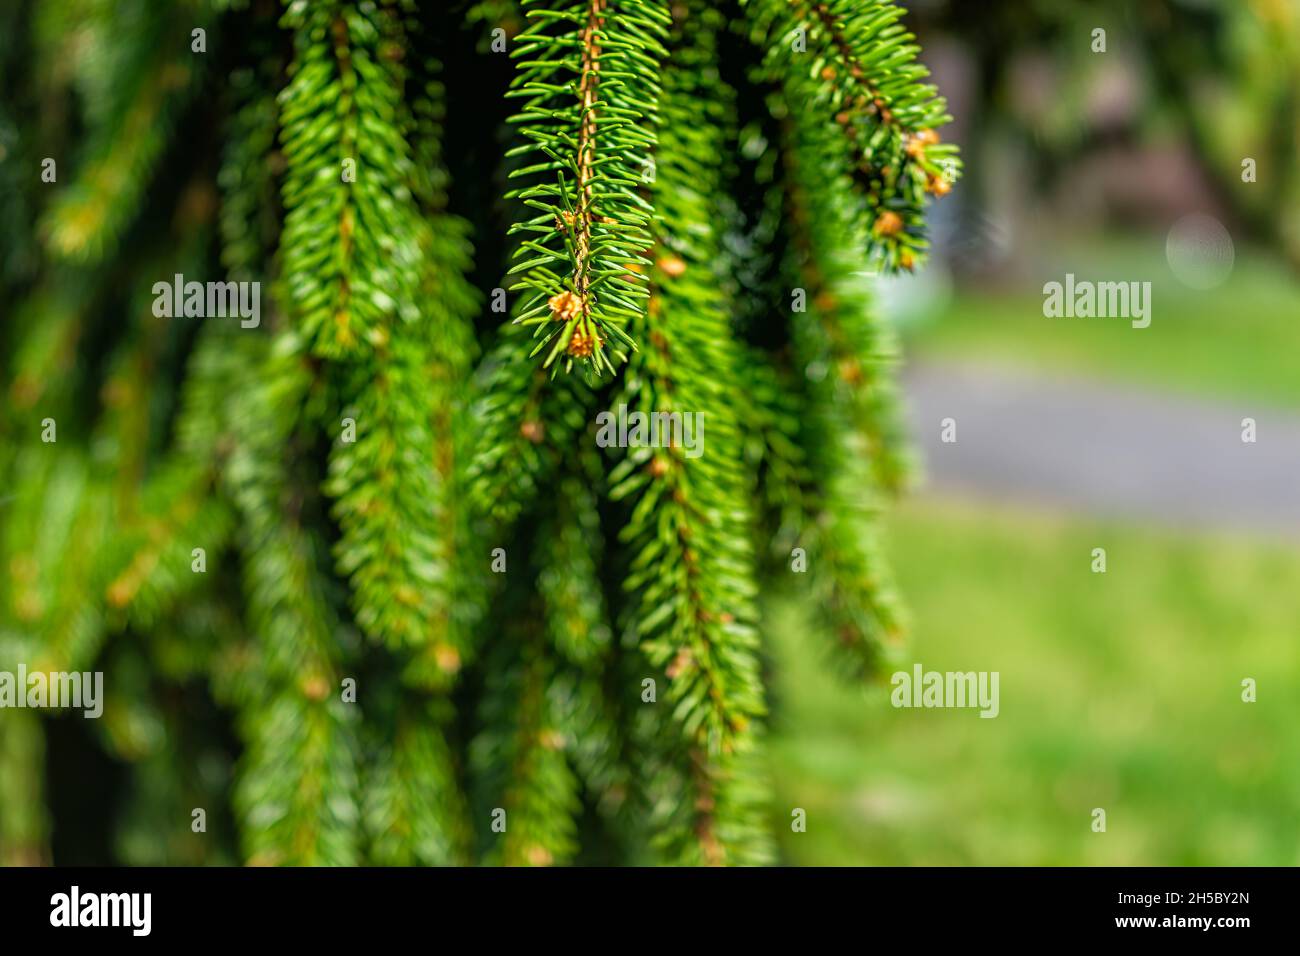 Macro closeup of hanging branches and green foliage needles of weeping pine tree with texture detail in Virginia summer garden and bokeh background Stock Photo